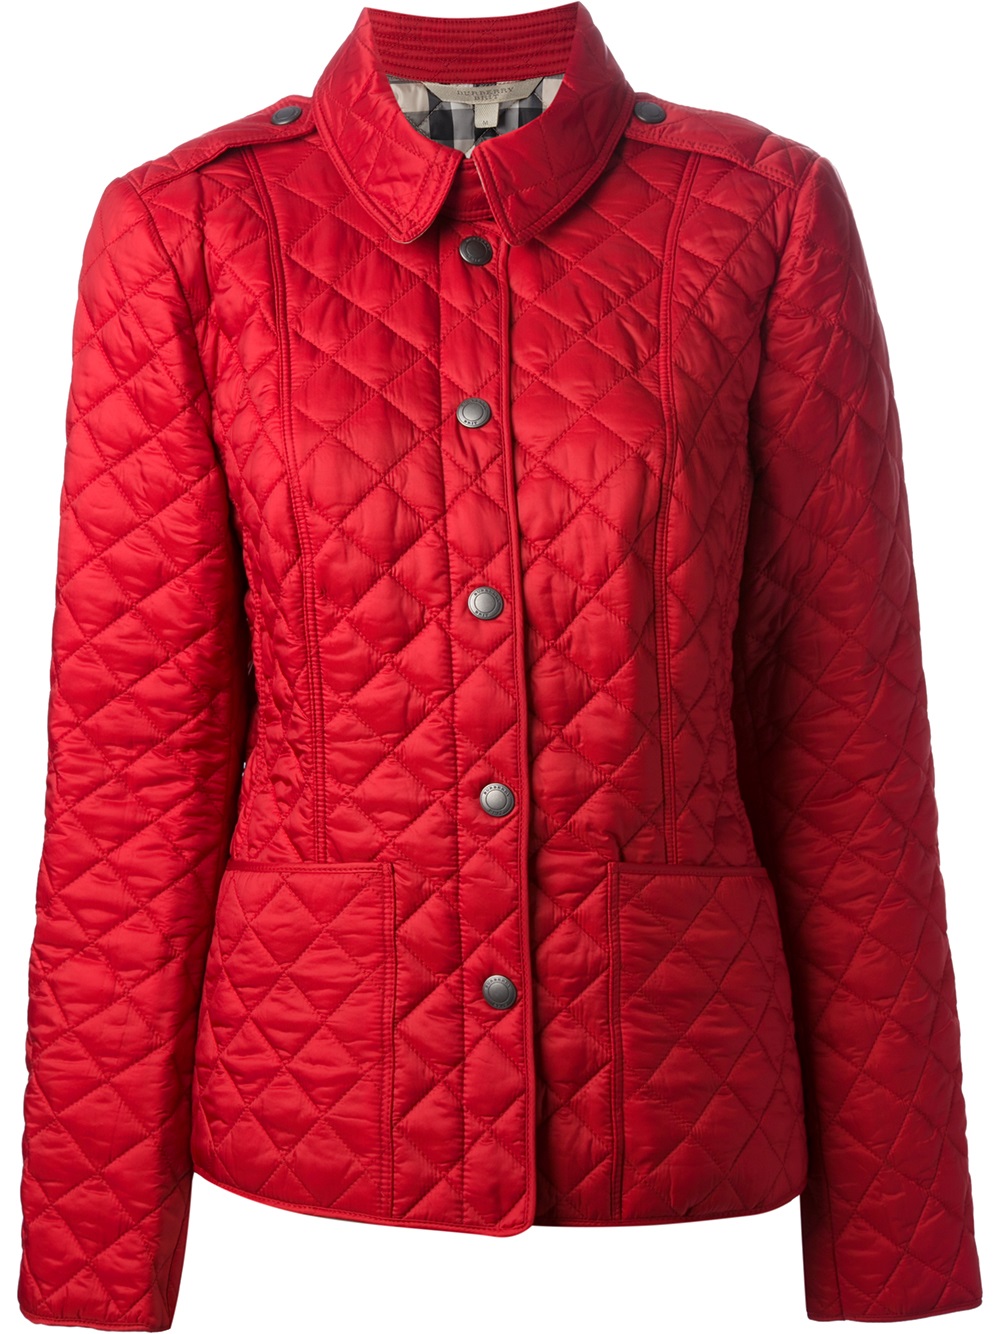 Burberry Brit Quilted Jacket in Red - Lyst